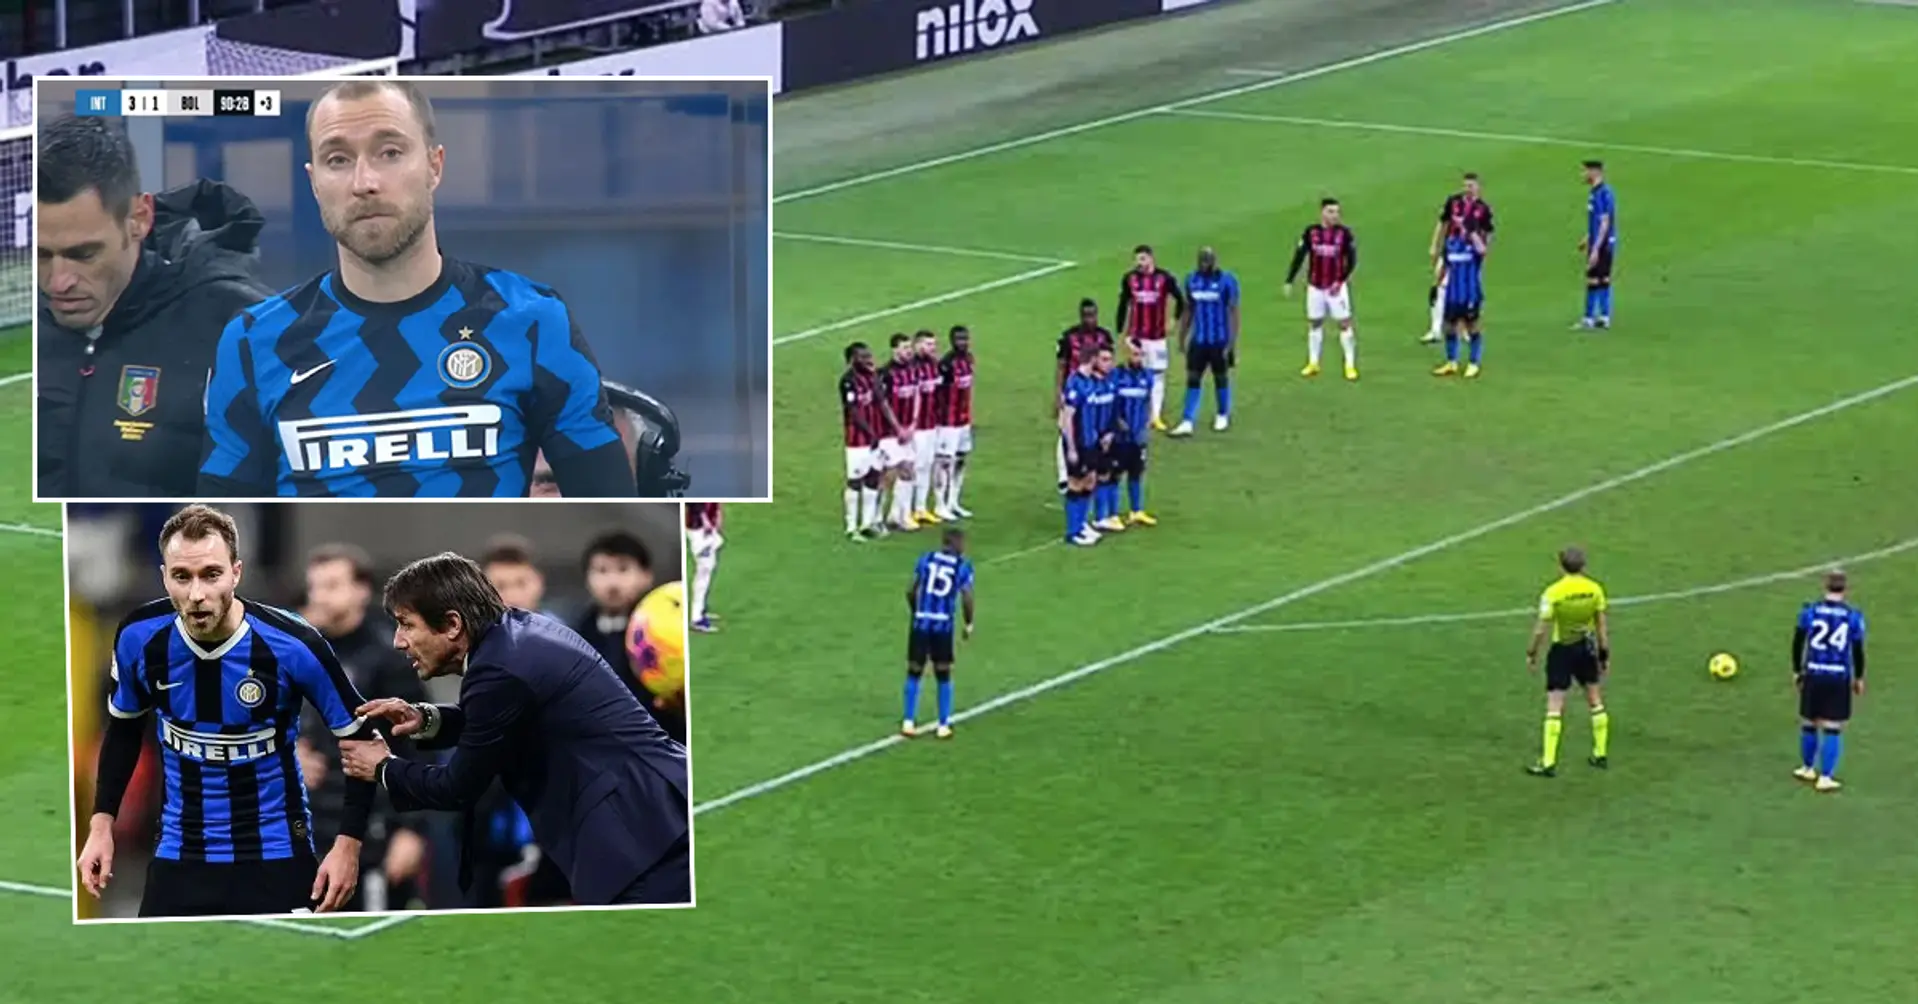 Conte kept humiliating Eriksen – Christian responded with insane free-kick to win Milano Derby